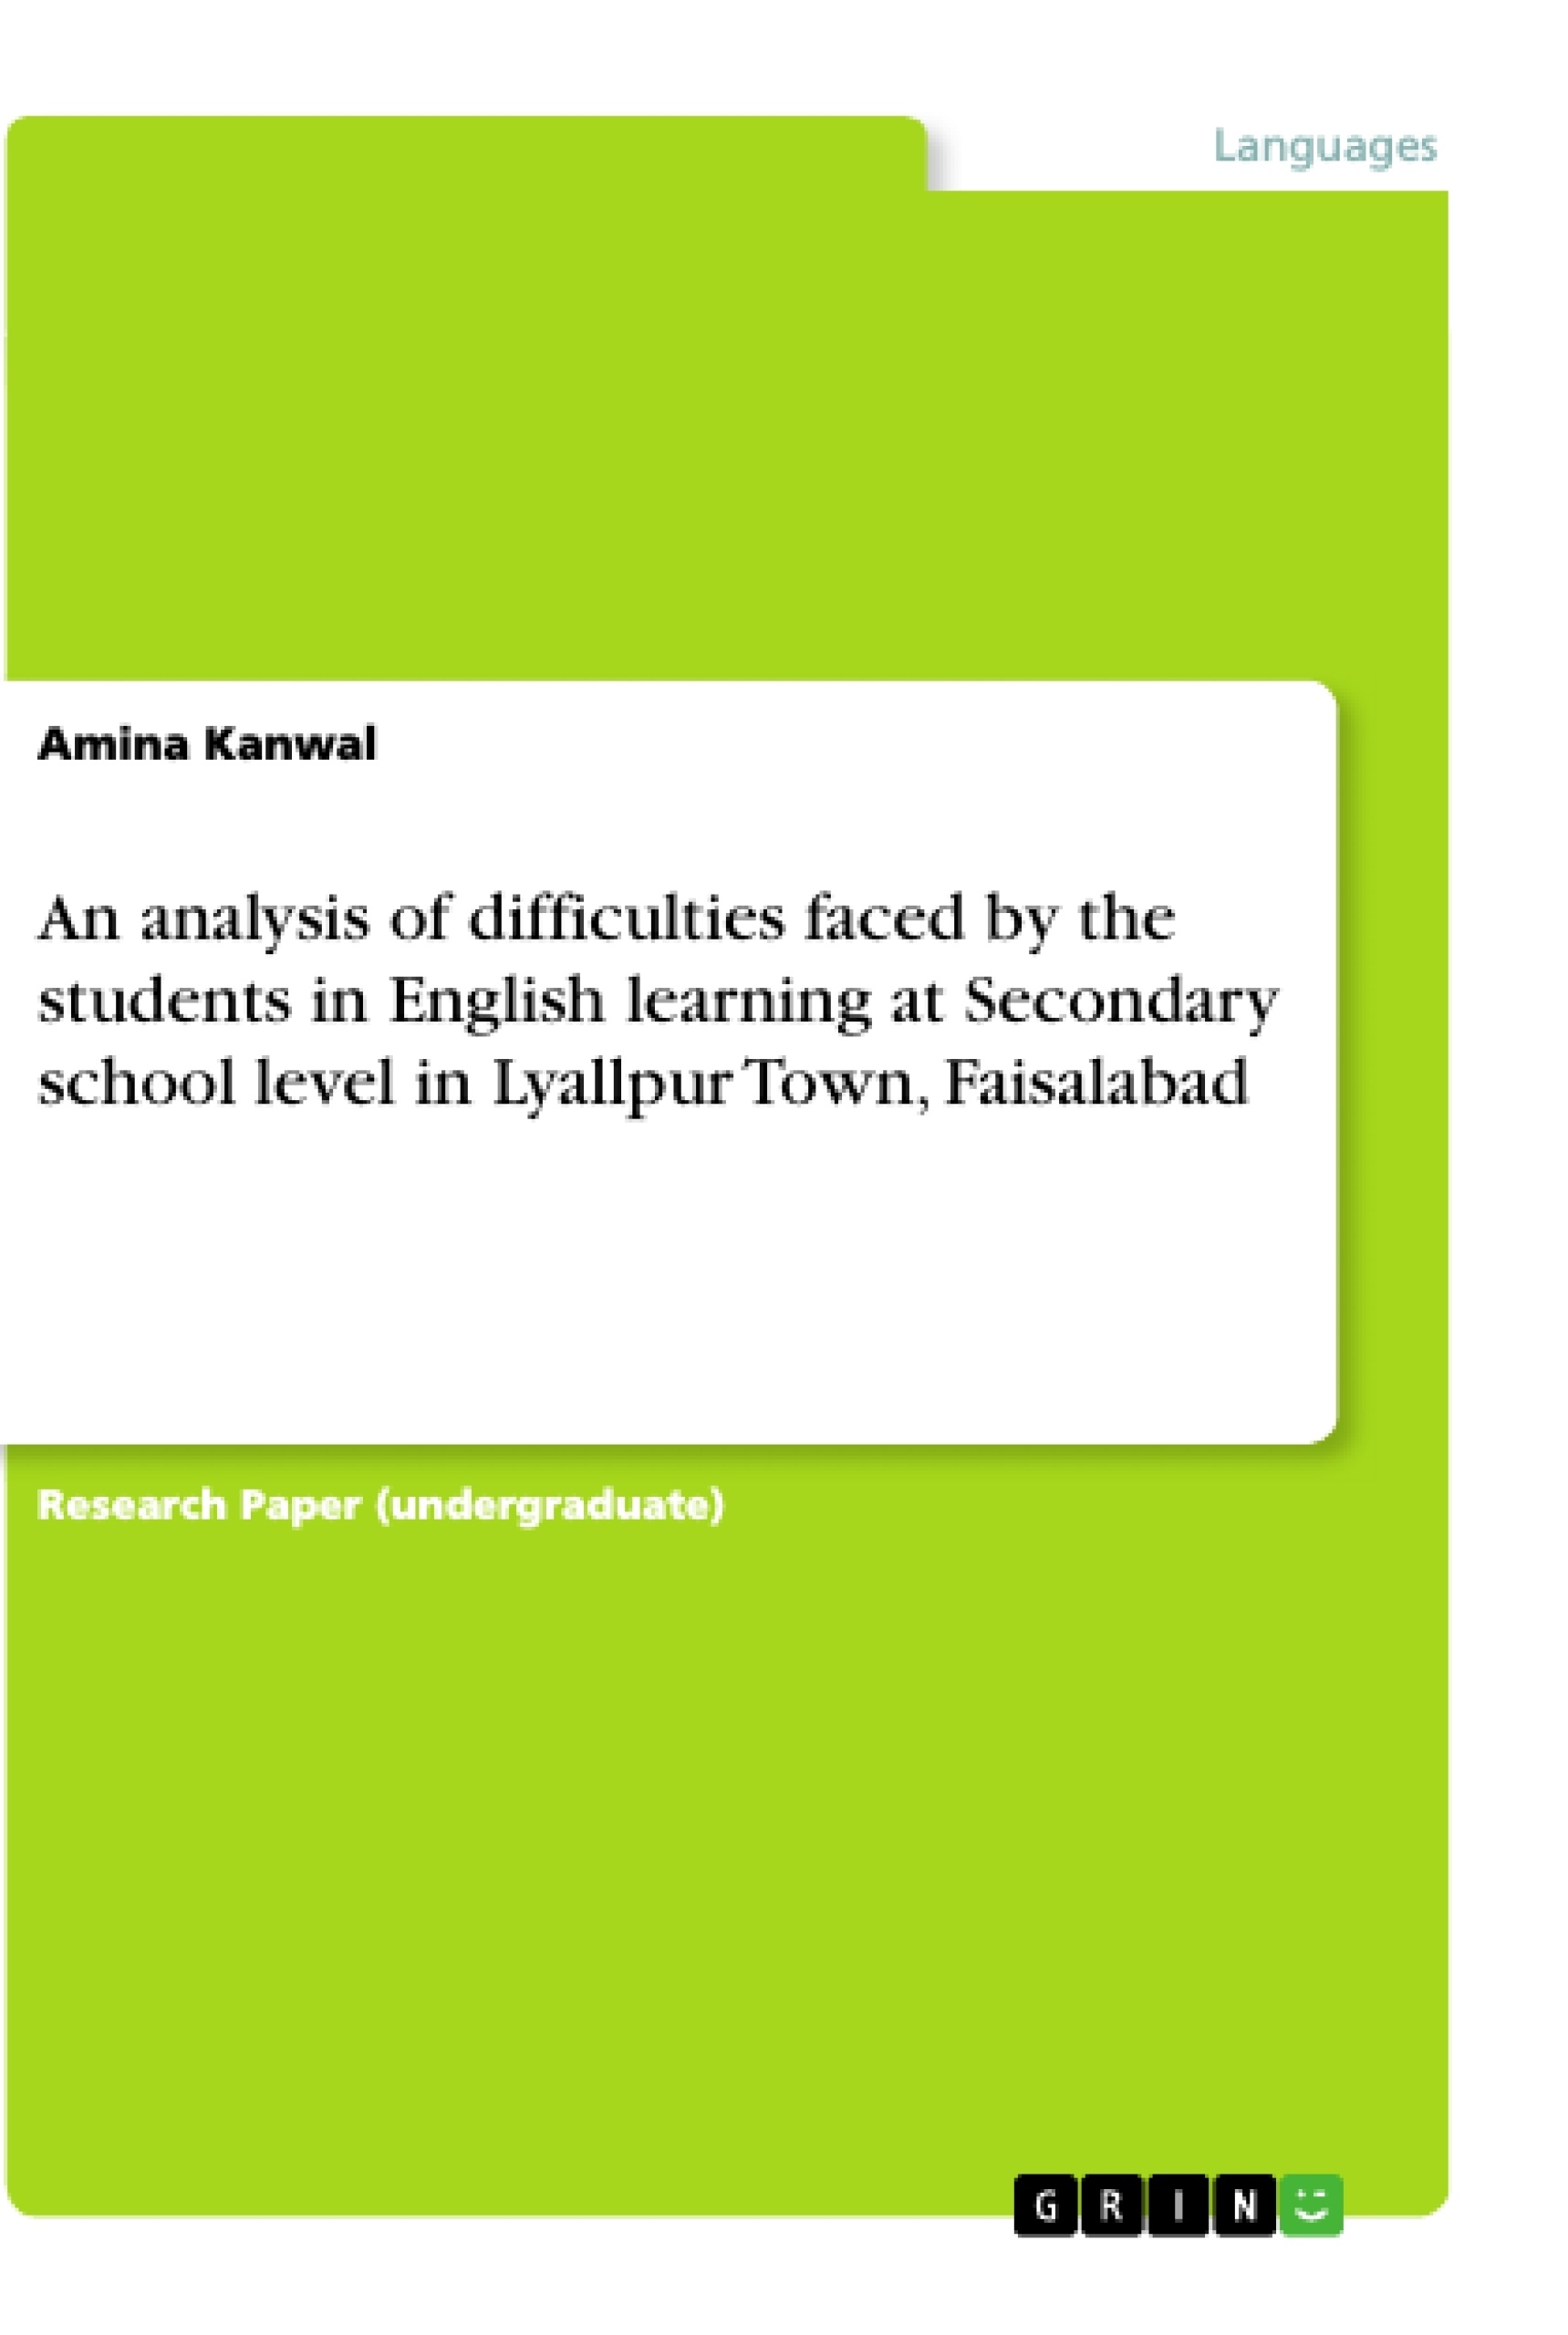 Title: An analysis of difficulties faced by the students in English learning at Secondary school level in Lyallpur Town, Faisalabad